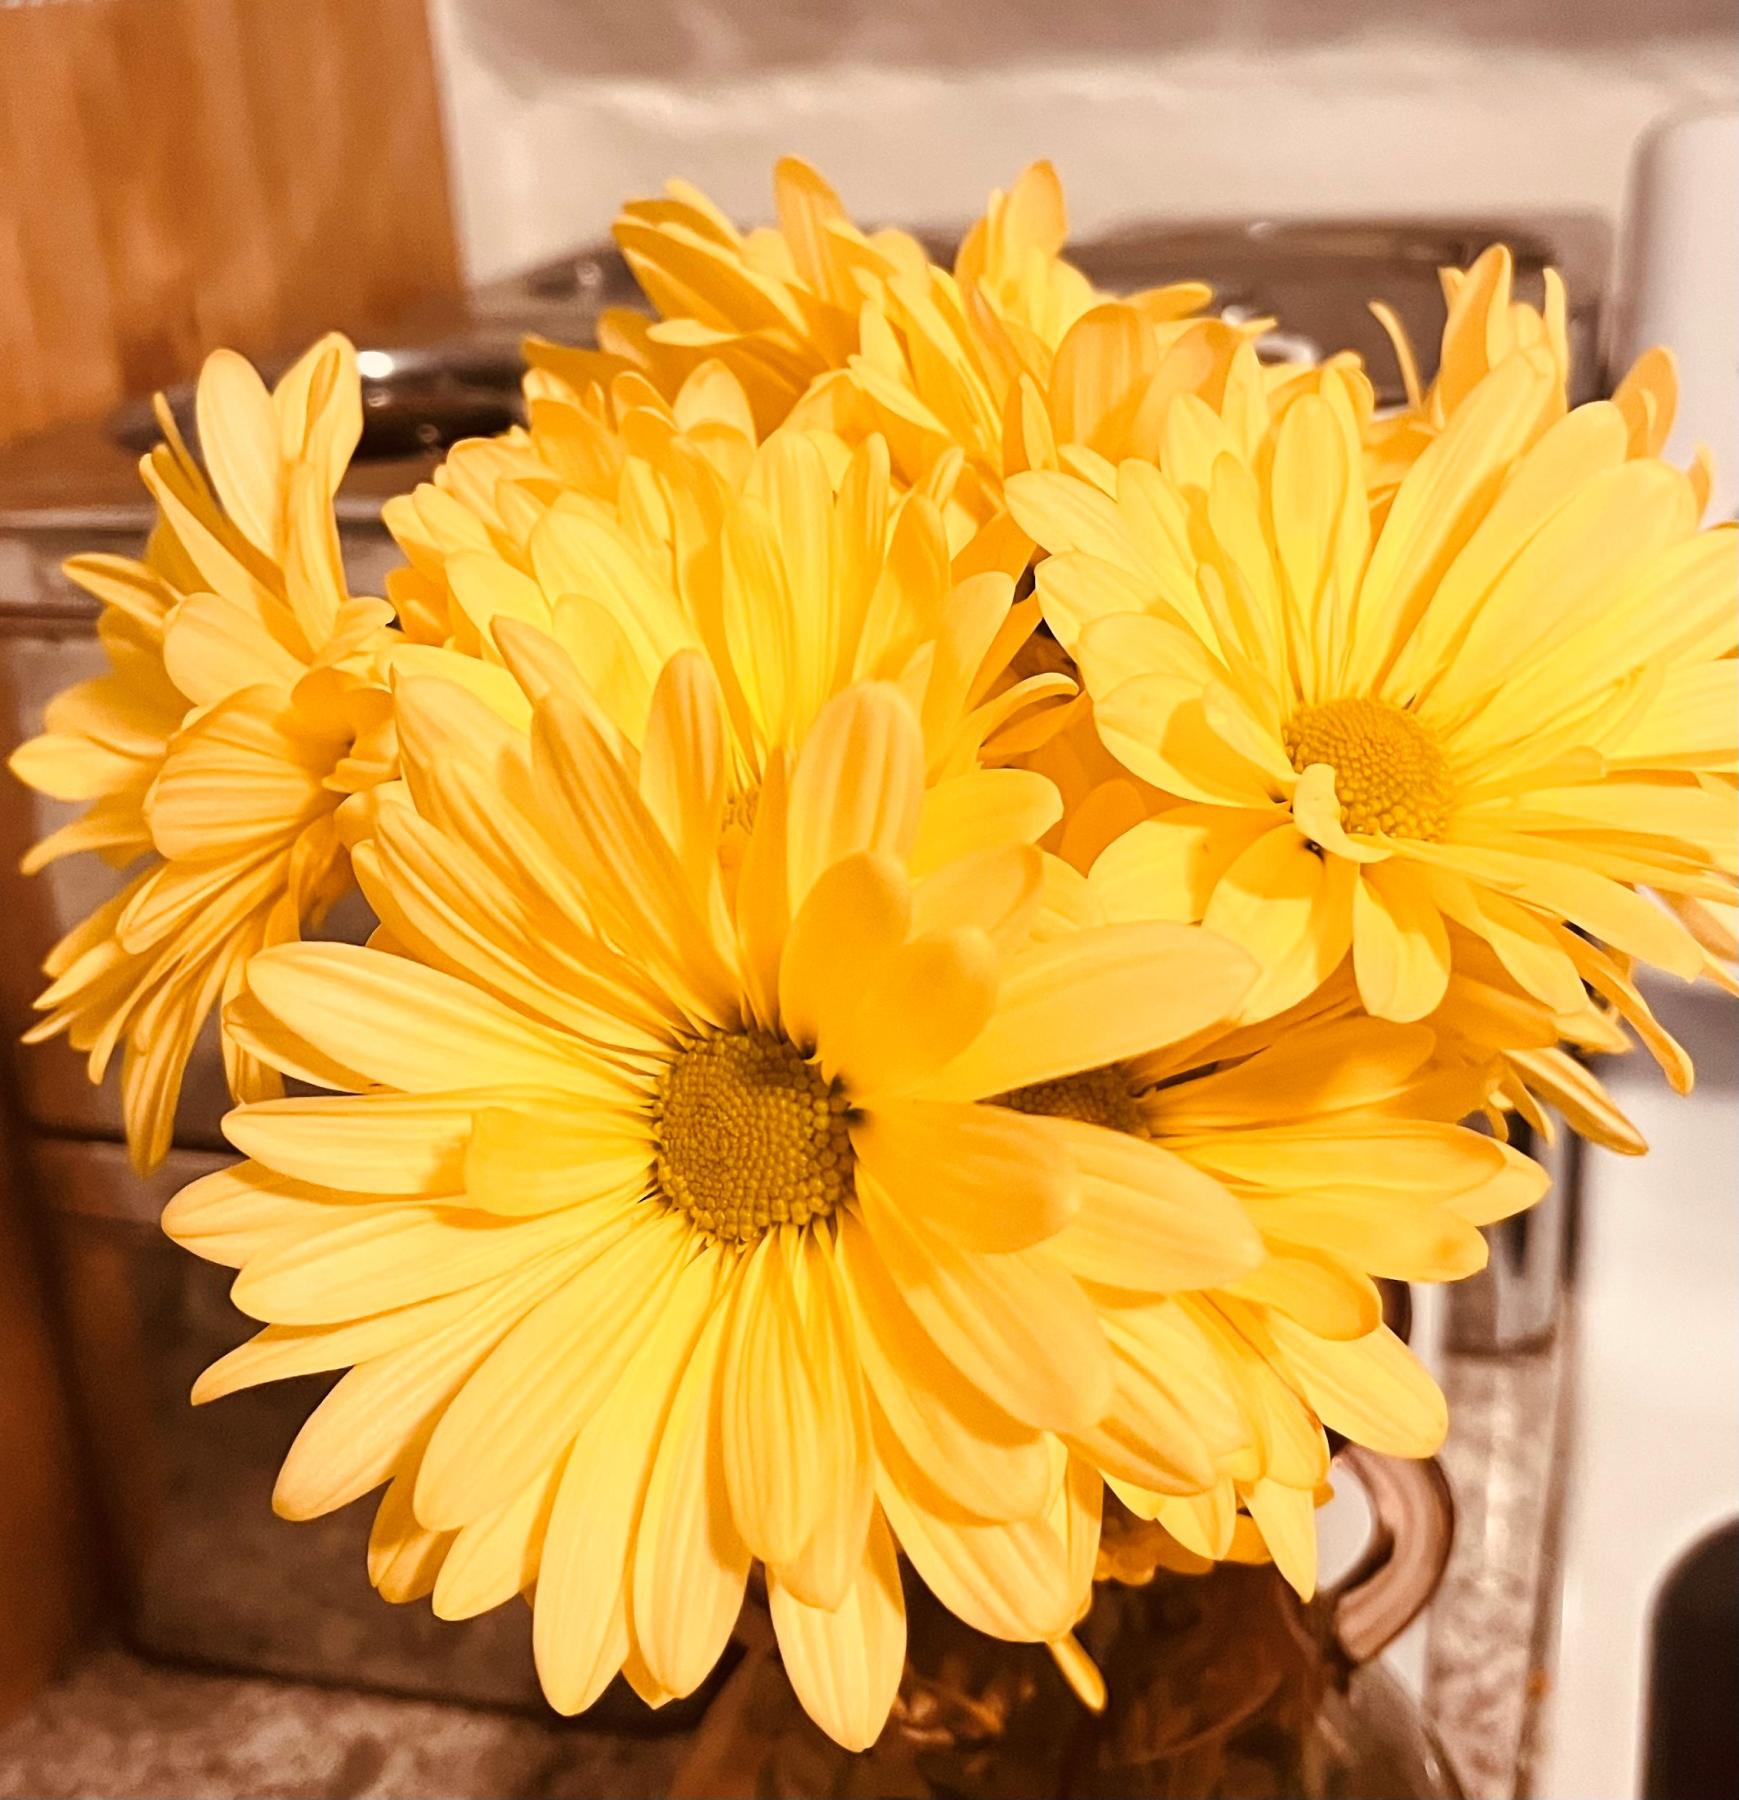 yellow daisies in a vase